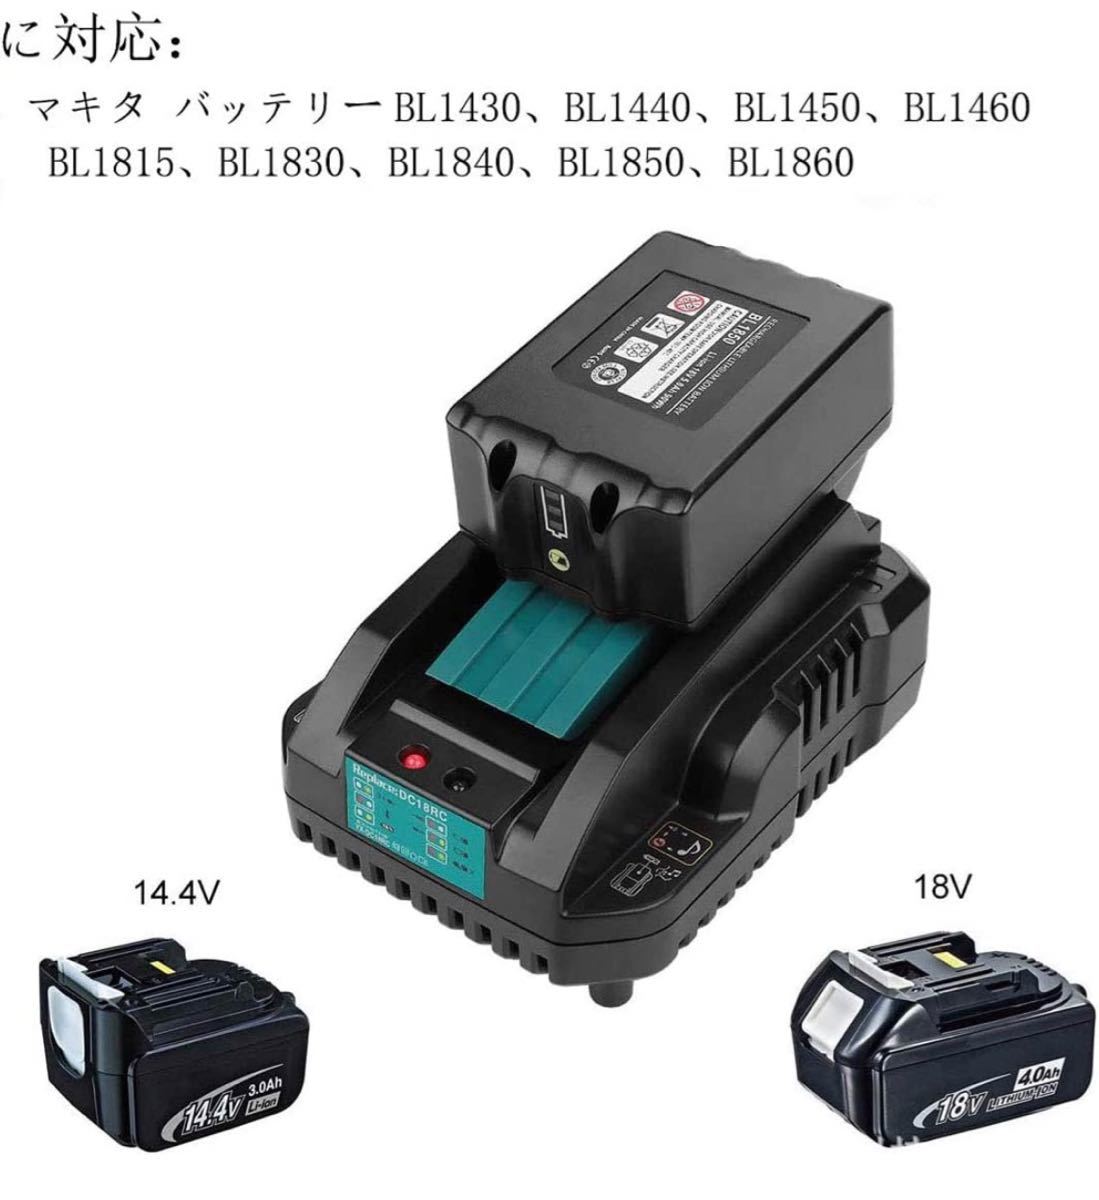  Makita interchangeable charger DC18RC fast charger interchangeable goods makita Makita charger ( small size type ) 14.4v 18v correspondence S rank 